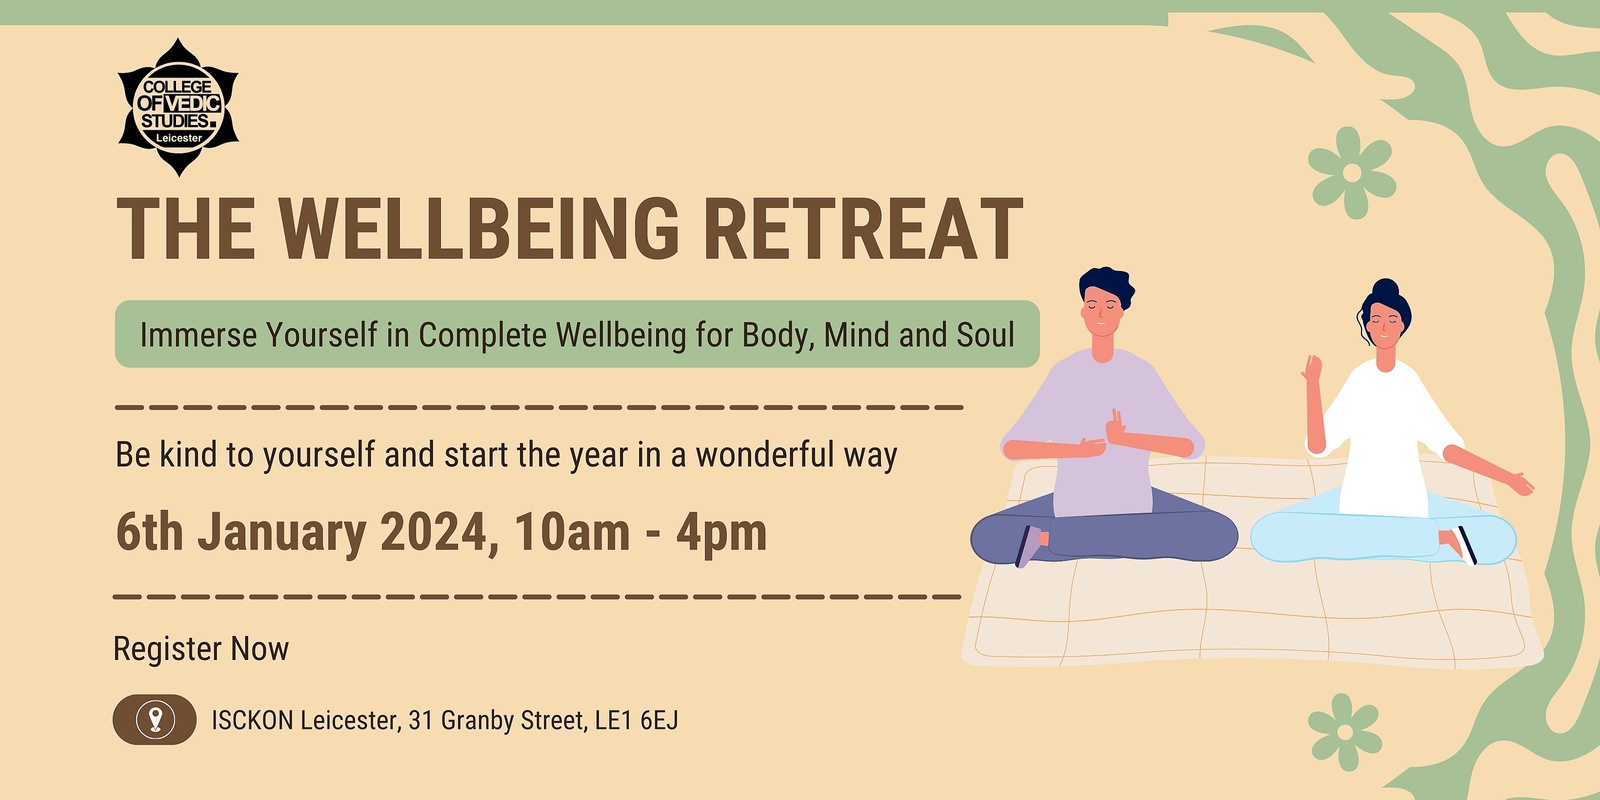 The Wellbeing Retreat